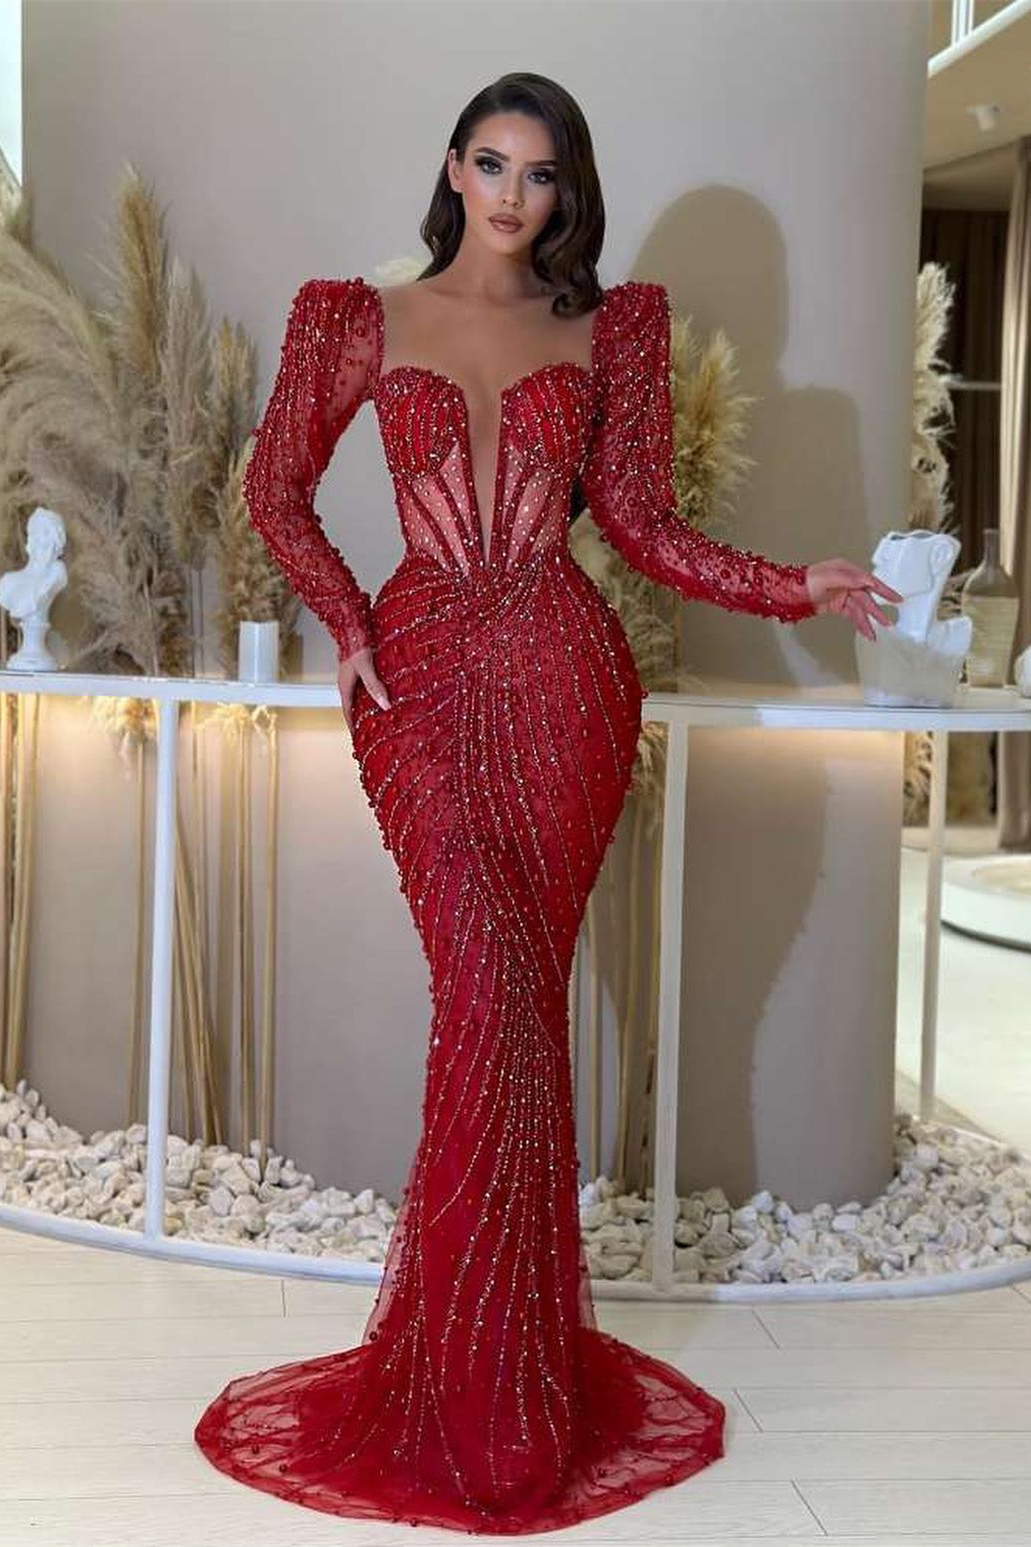 Gorgeous Red Deep V-Neck Long Sleeves Mermaid Prom Dress With Beaded Sequins - lulusllly